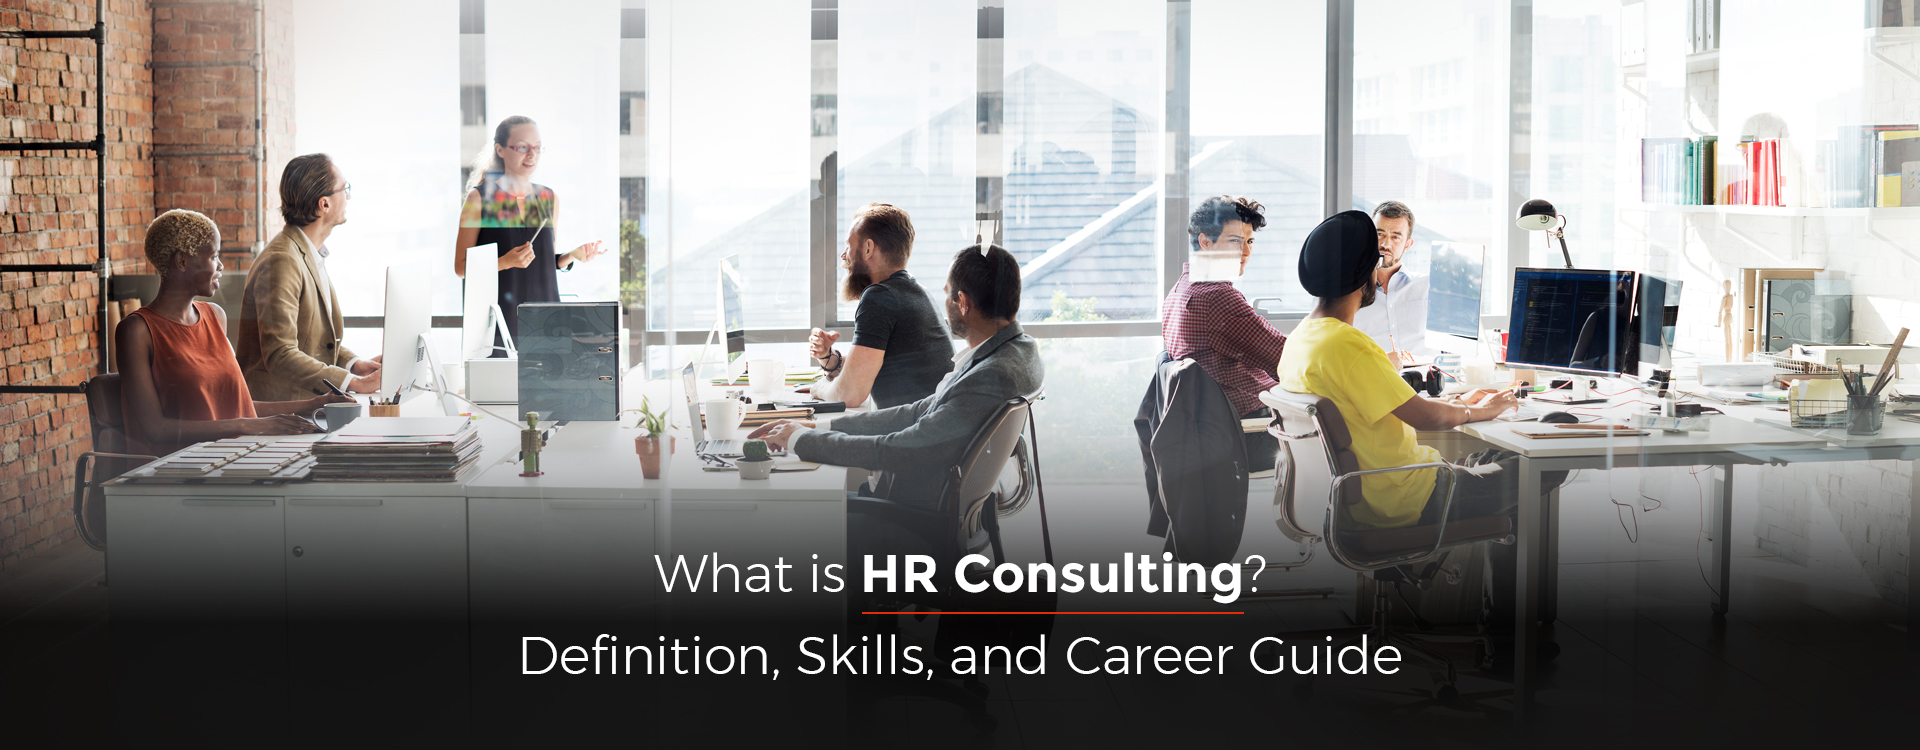 HWhat Is HR Consulting? Definition, Skills, and Career Guide